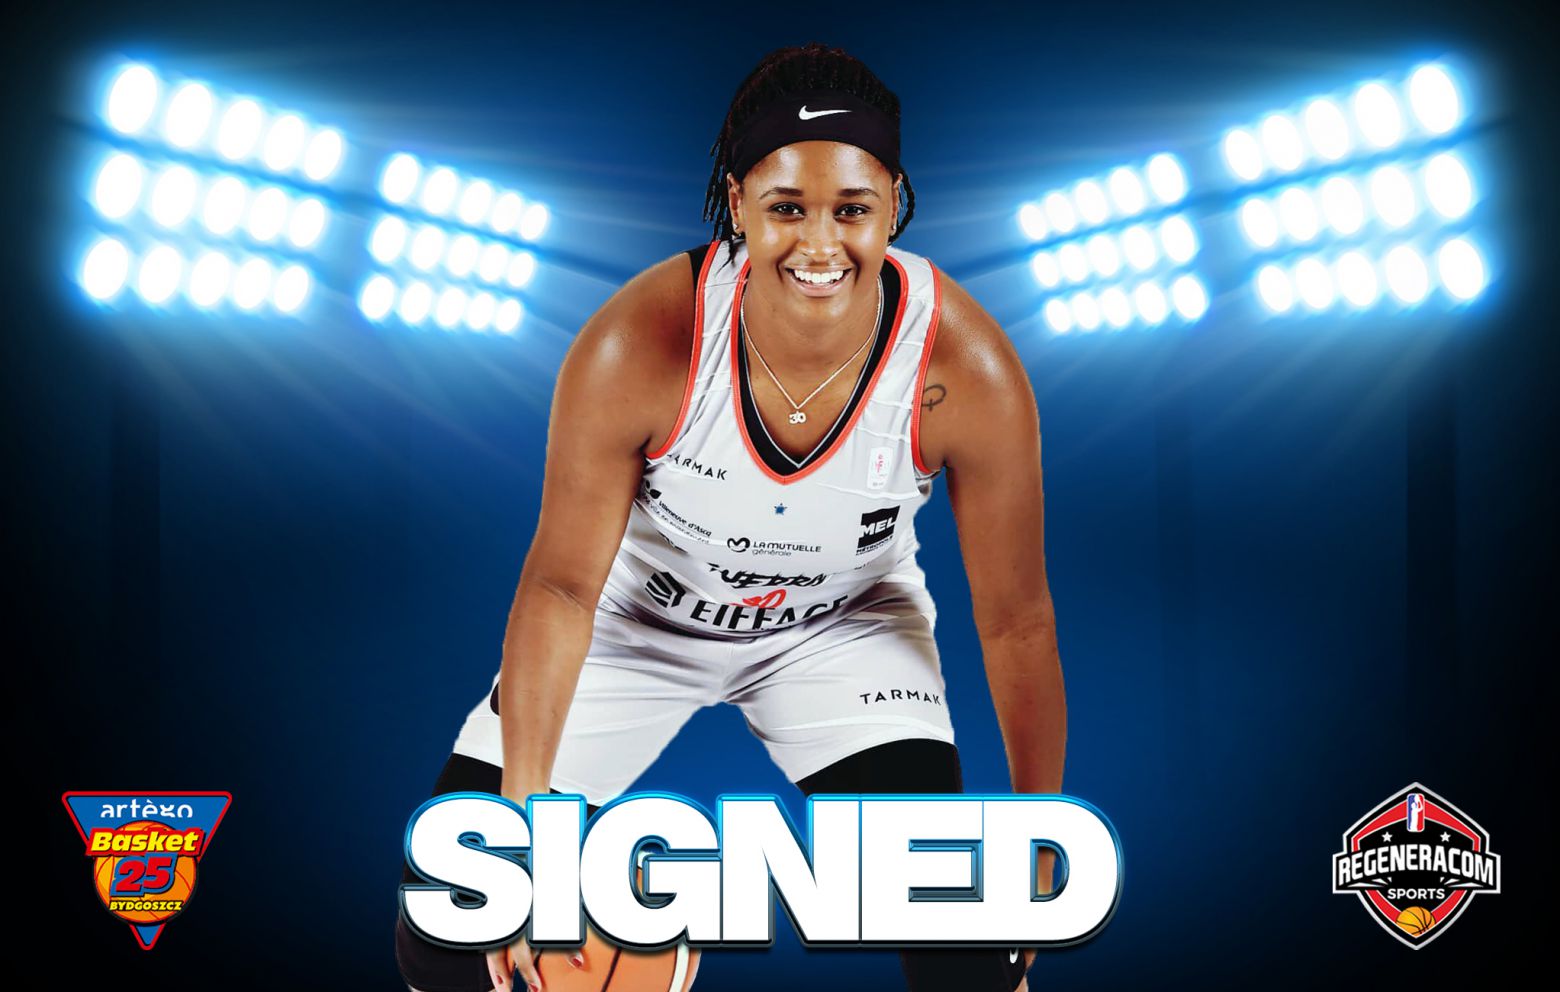 SHANTE EVANS has signed in Poland with Artego